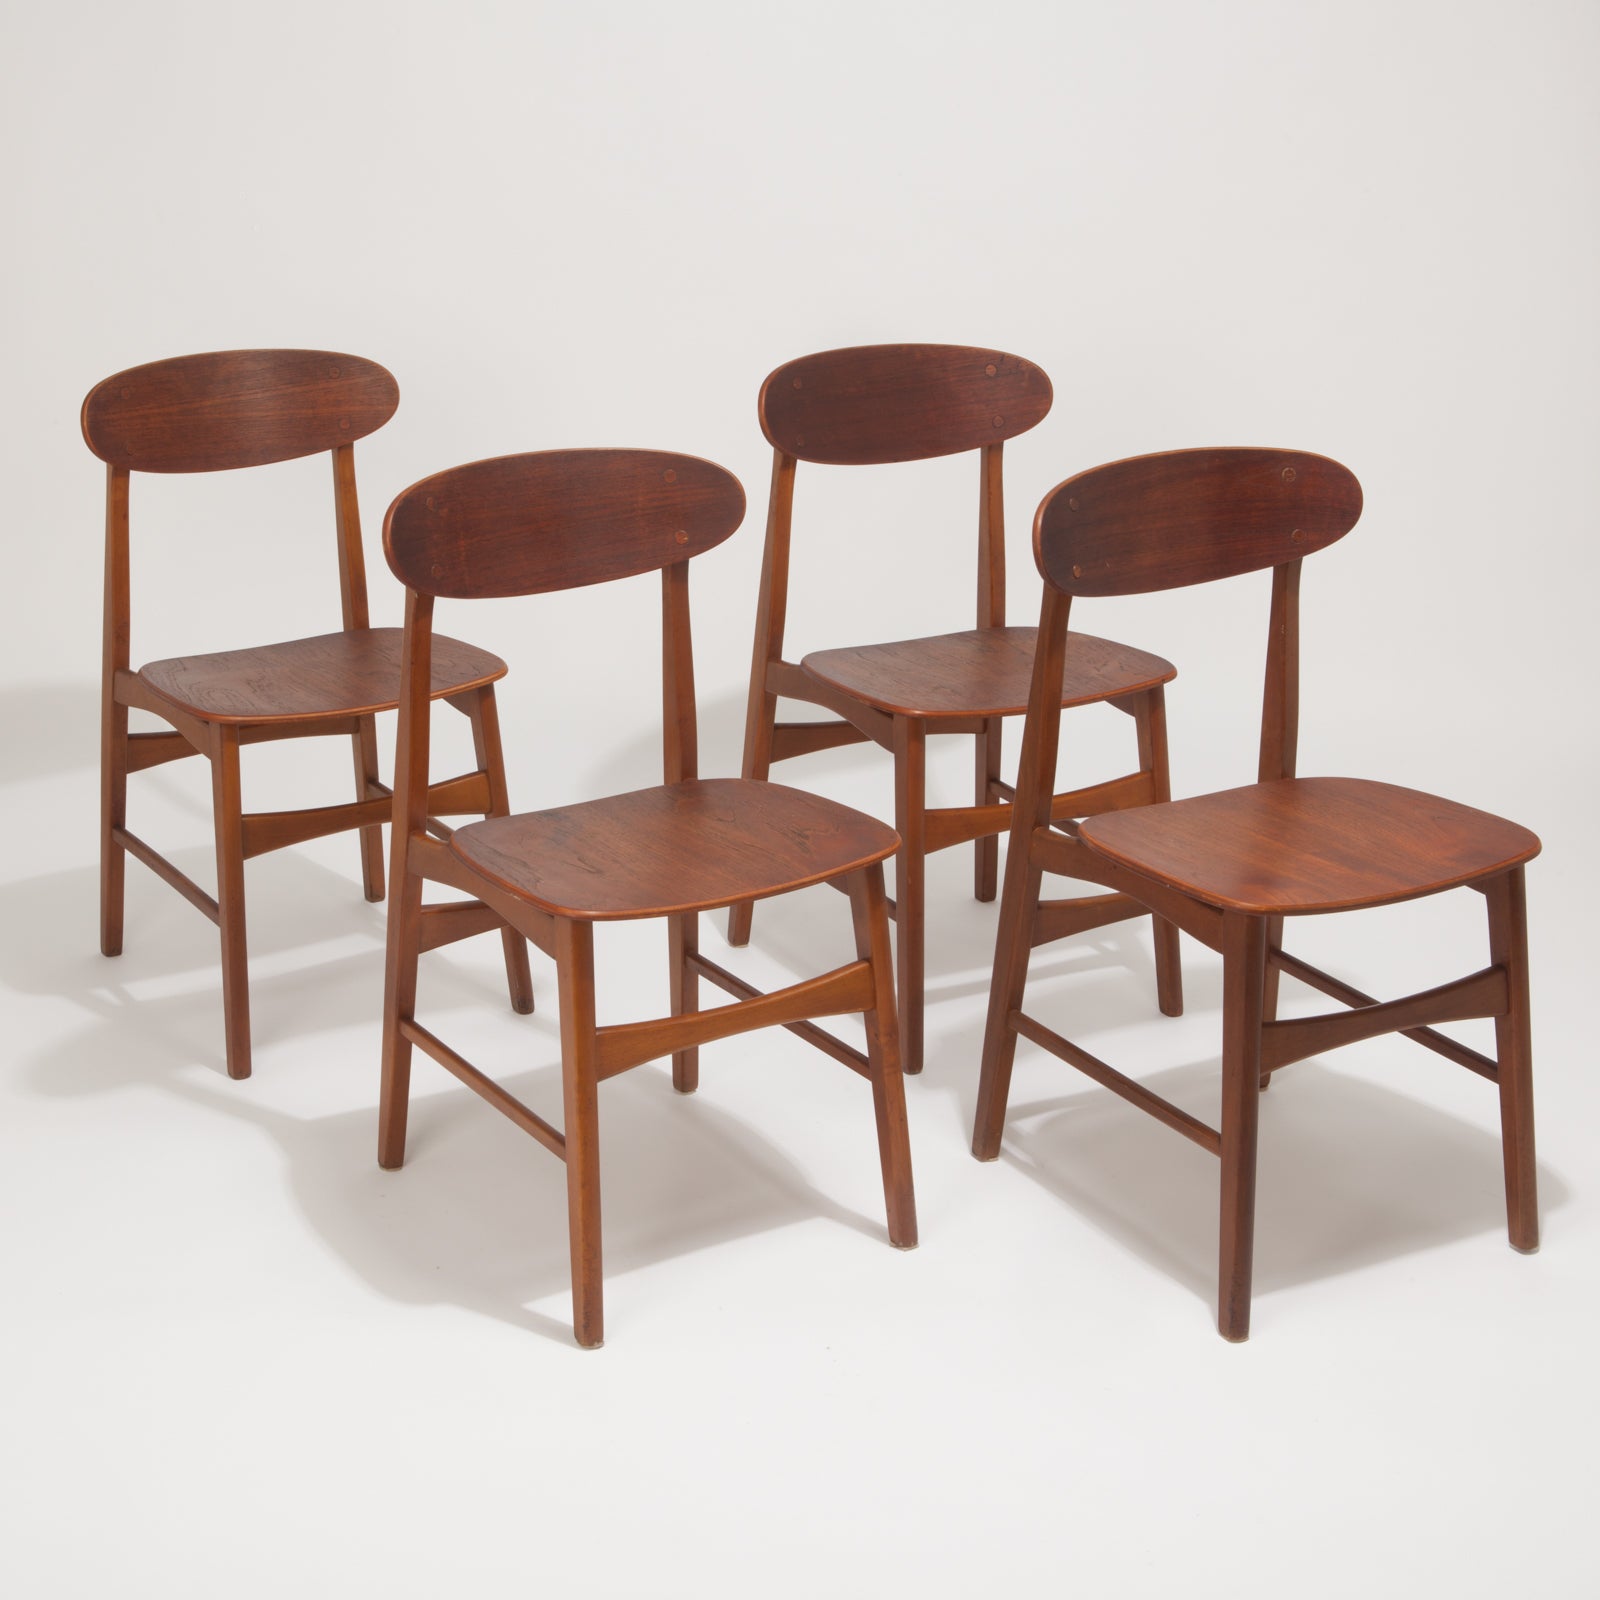 Set of 4 Teak and Beech Dining Chairs